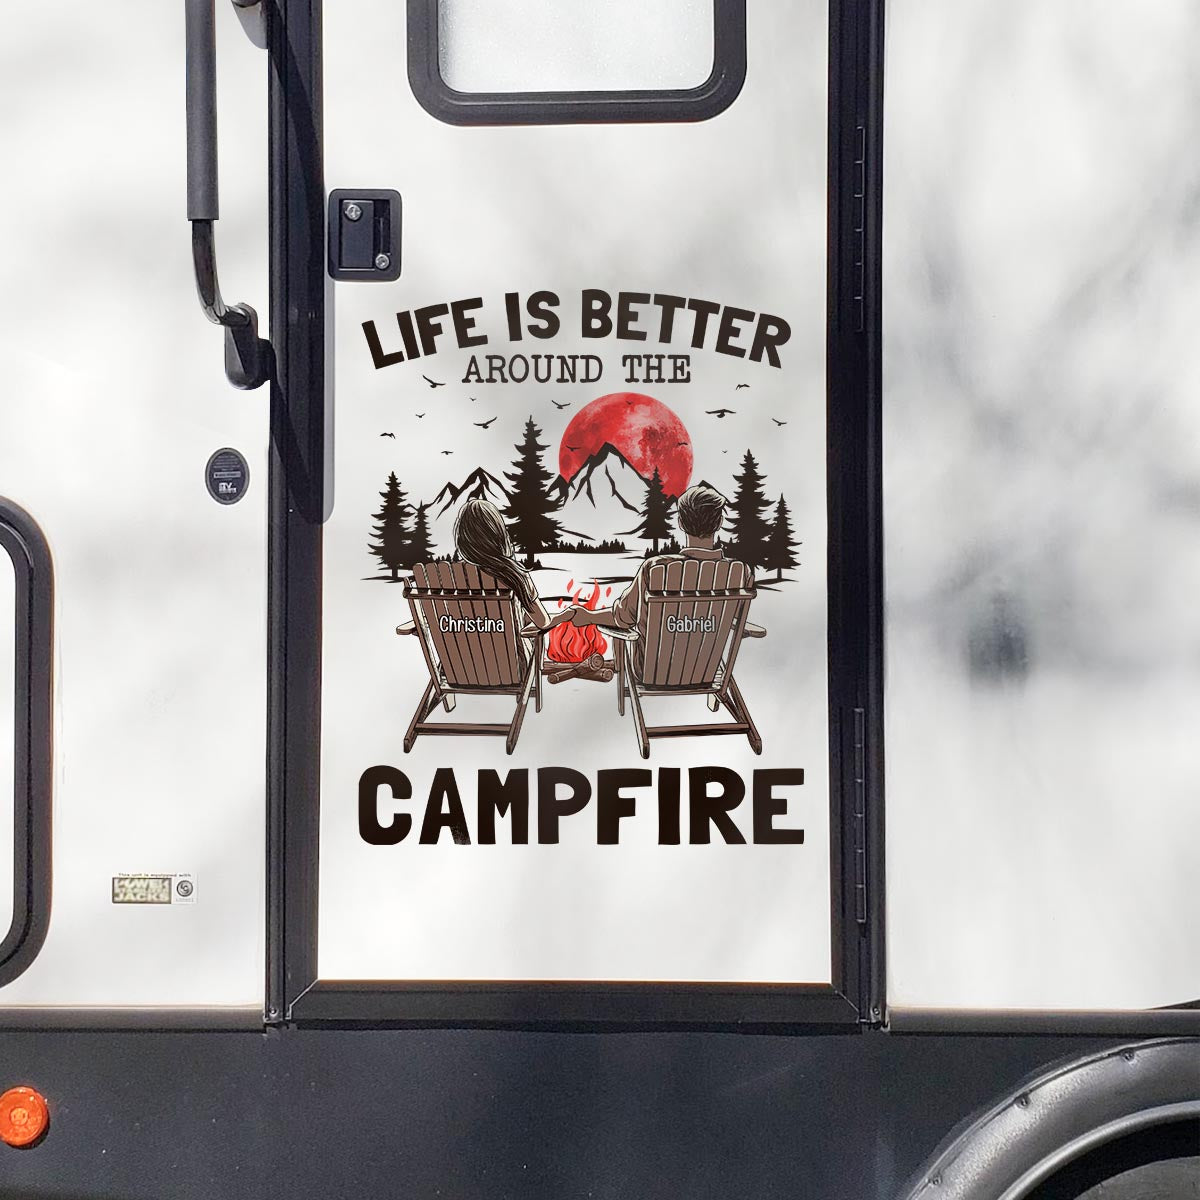 Life Is Better Around A Campfire - Personalized RV Decal